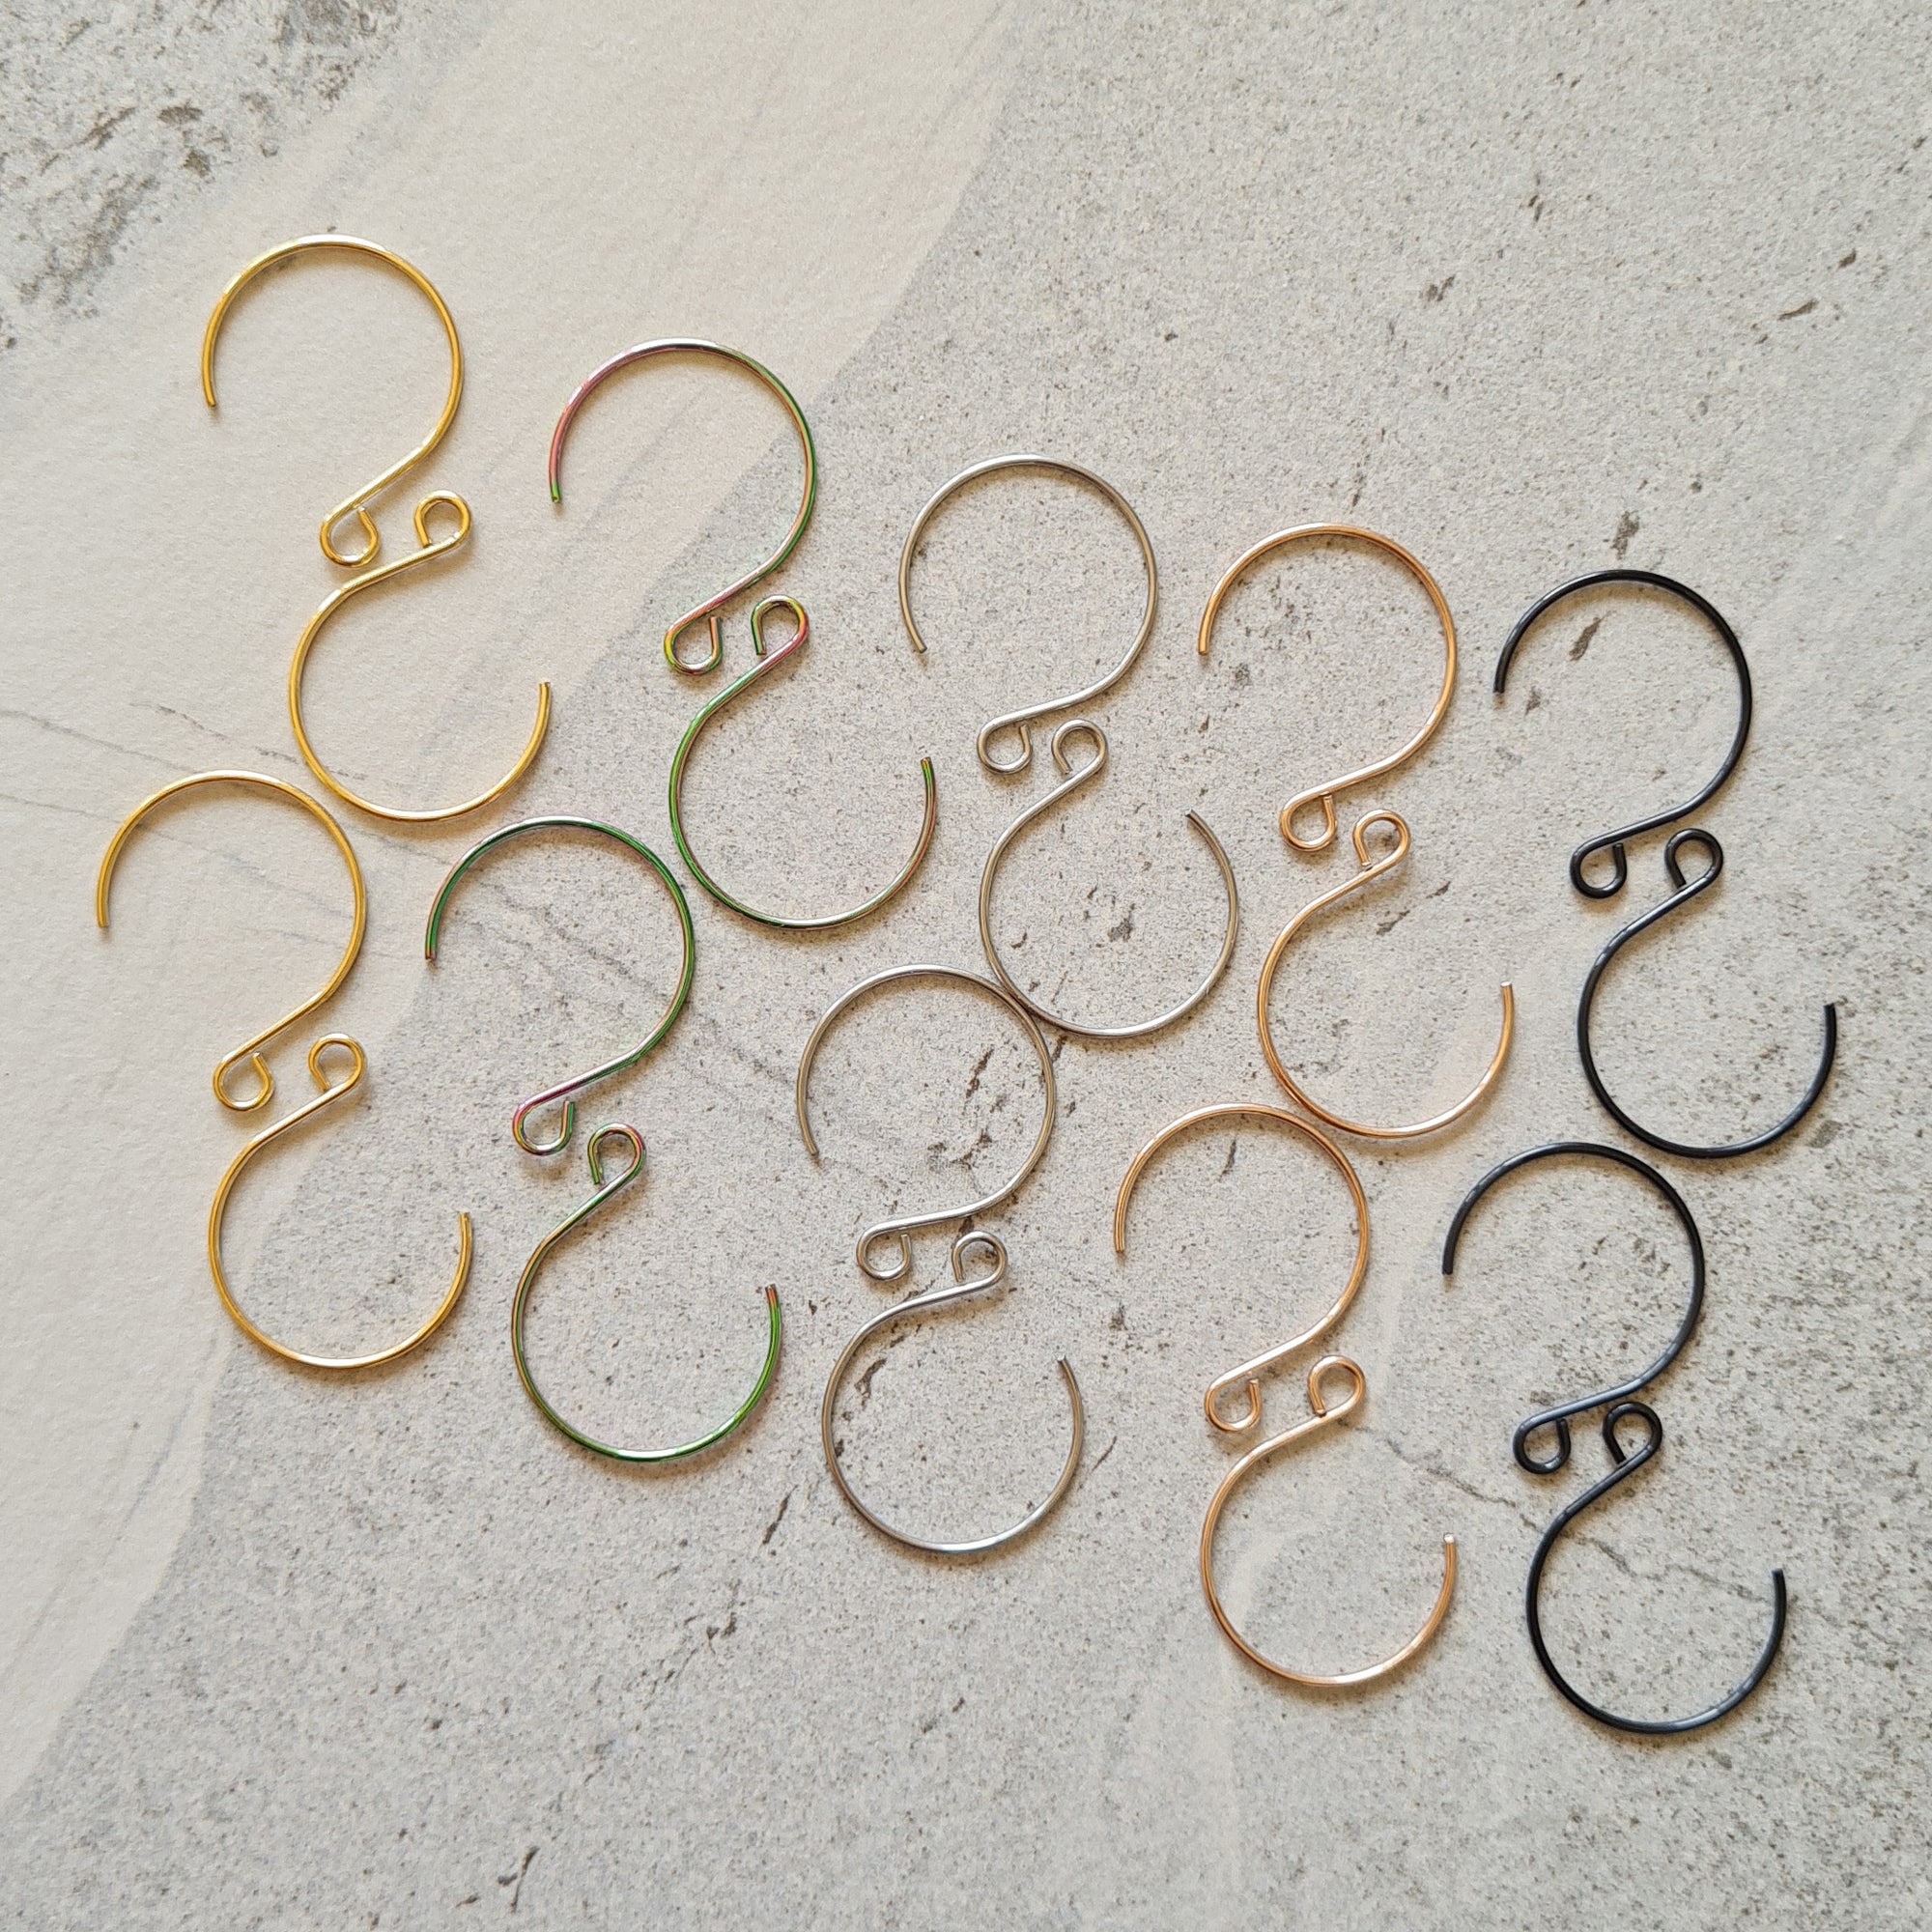 18mm Gold Stainless Steel Earring Hoop - 50 pieces